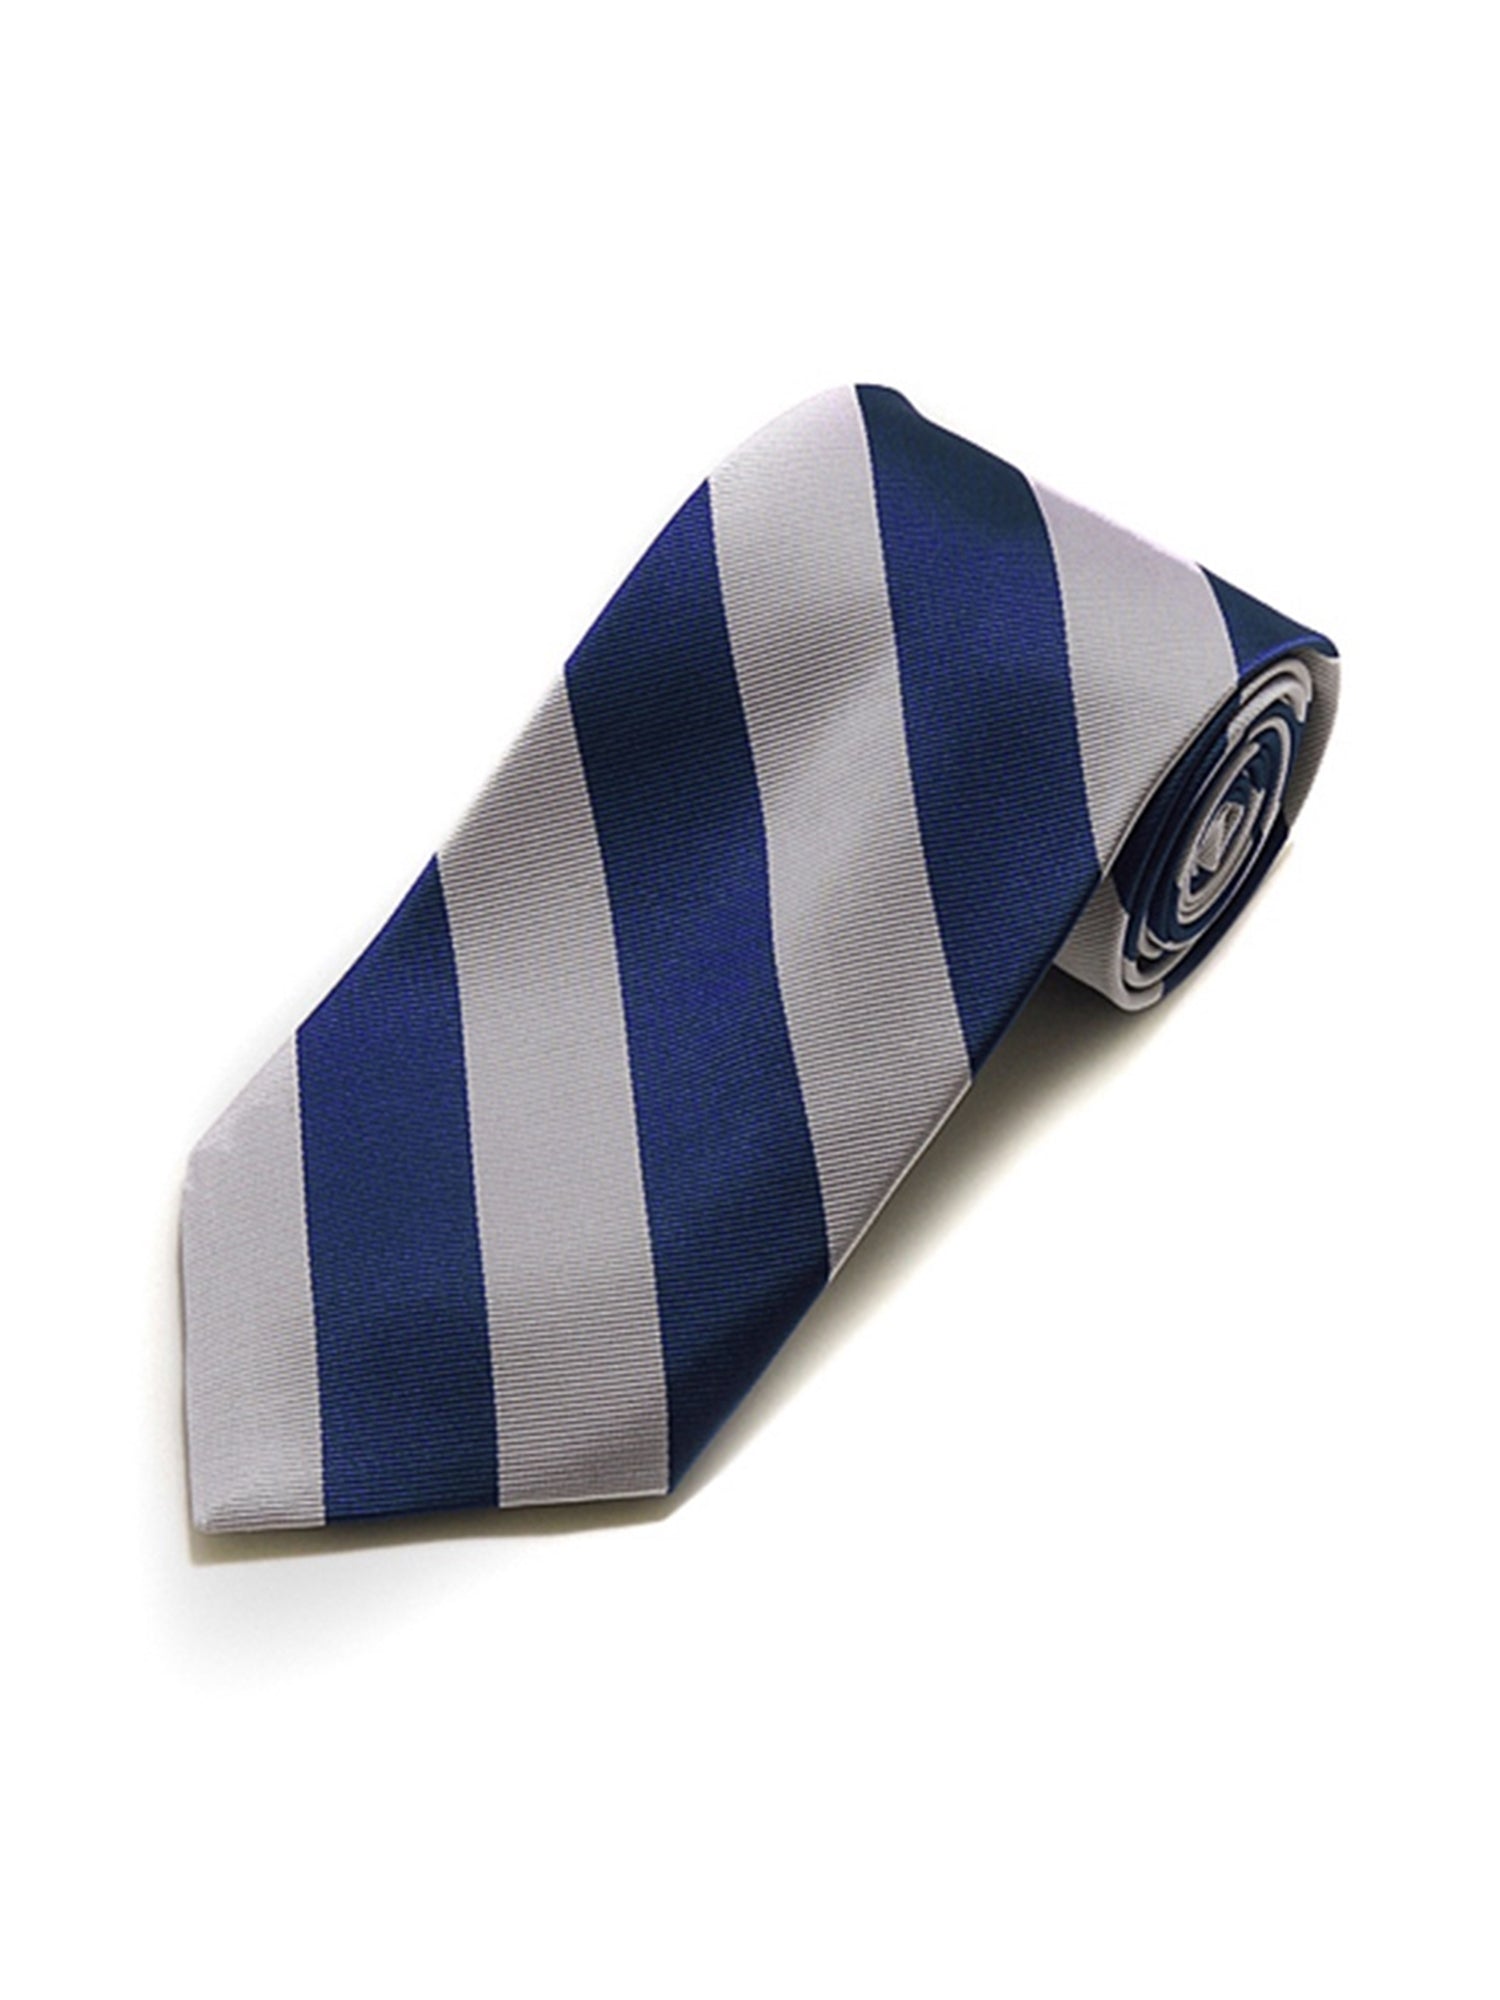 Men's College Striped Colored Silk Long Or X-Long Neck Tie Neck Tie TheDapperTie Navy & Gray 57" long & 3.25" wide 